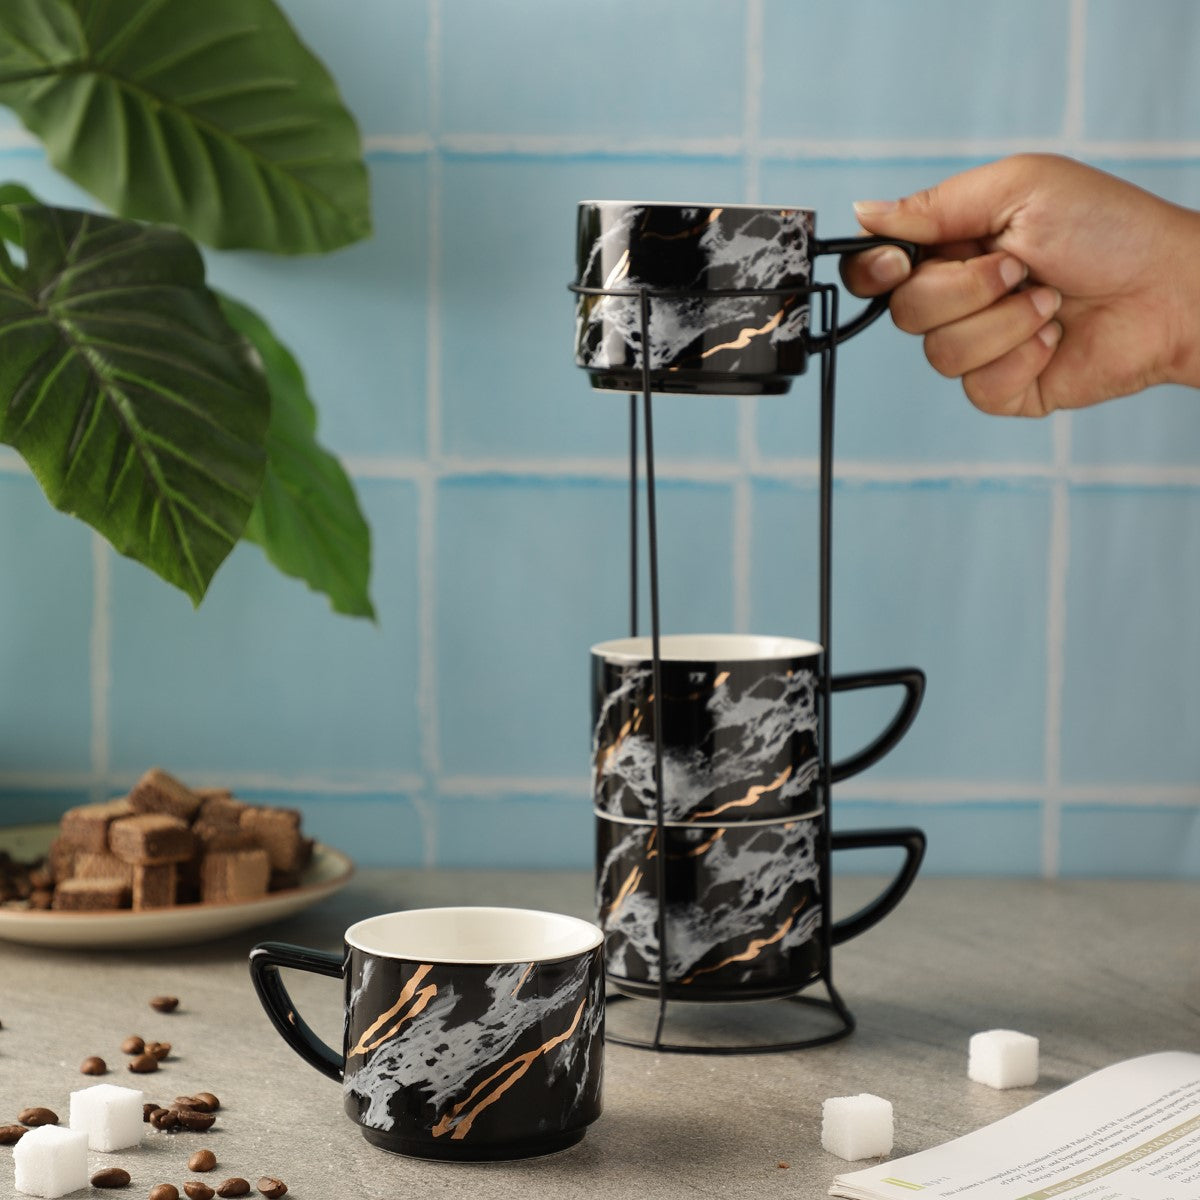 Marbled Dipped Mugs!